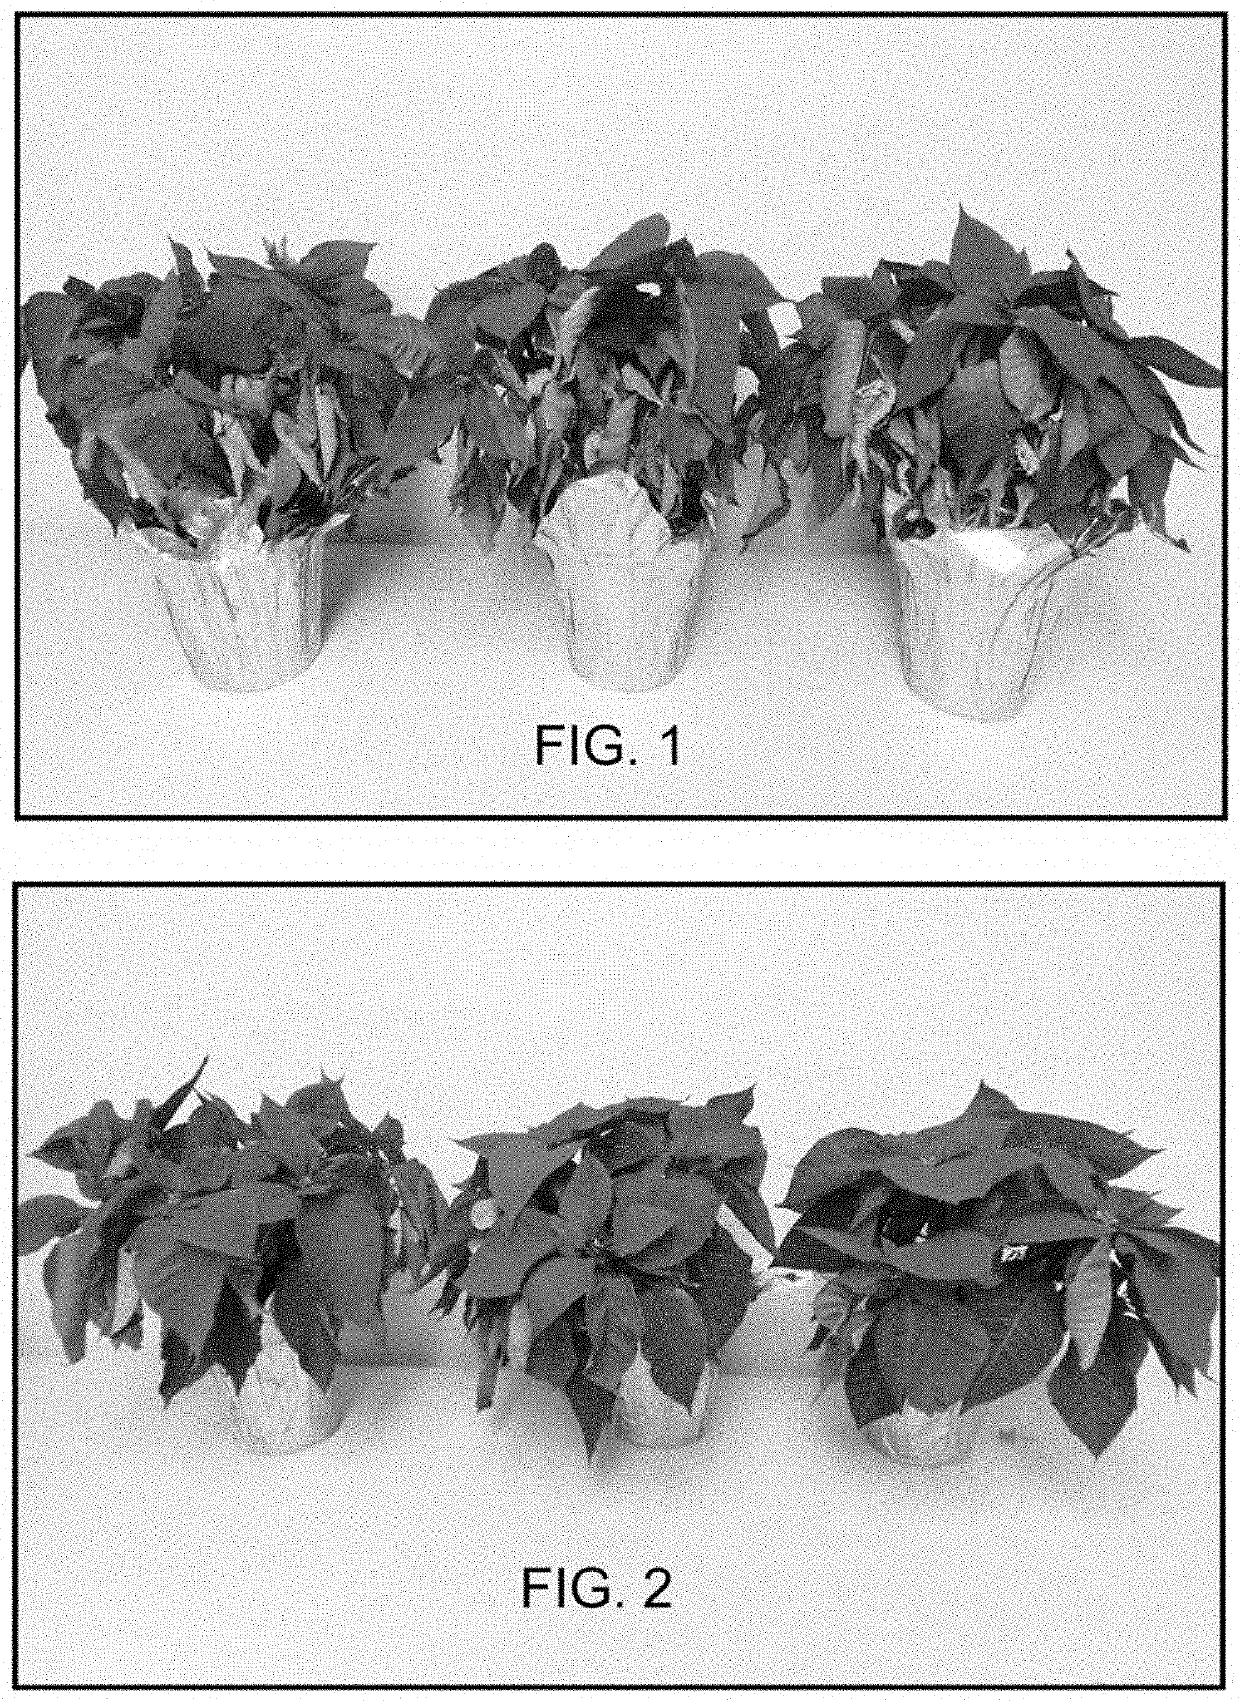 Compositions and methods for improving the drought tolerance of plants